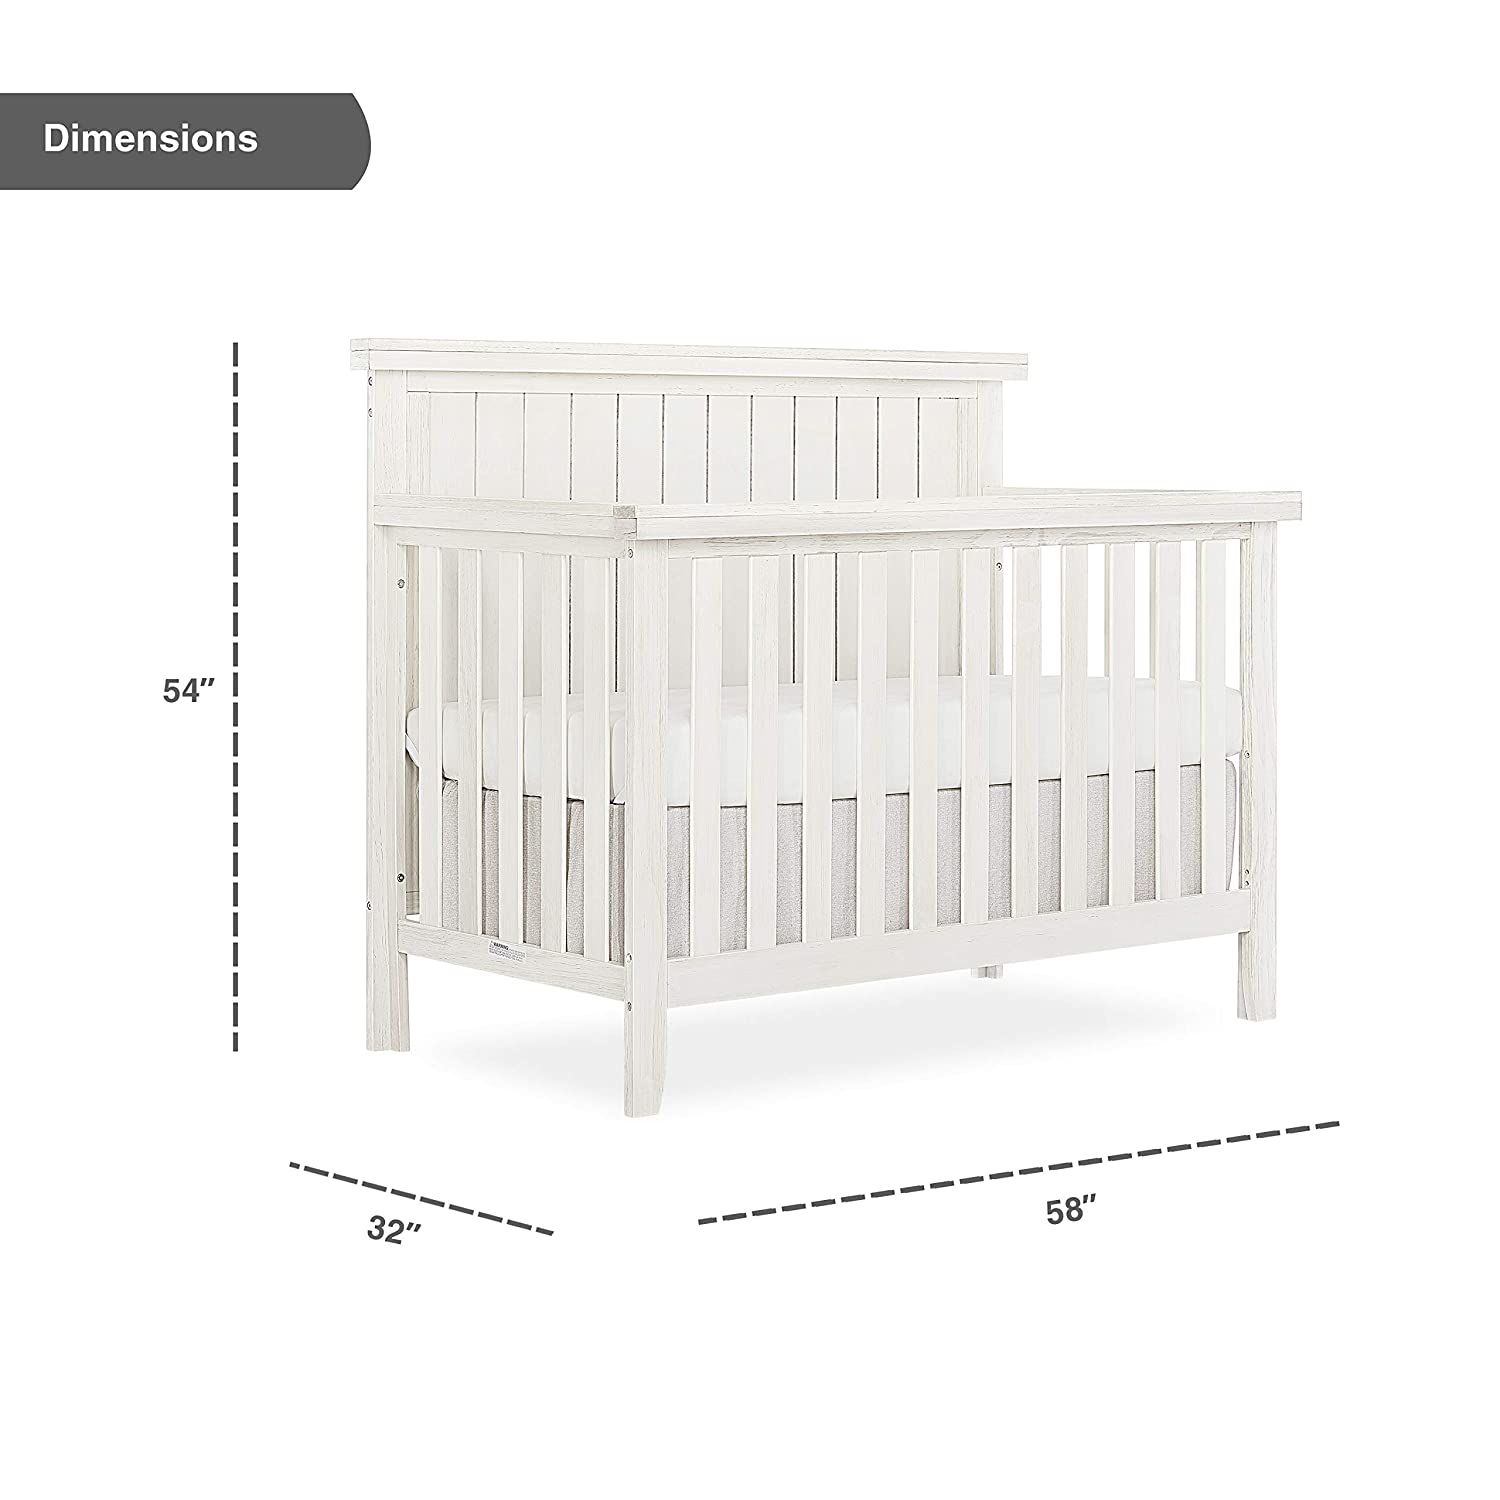 Sweetpea Baby Red Wood 4-in-1 Convertible Crib in Weathered White - $160